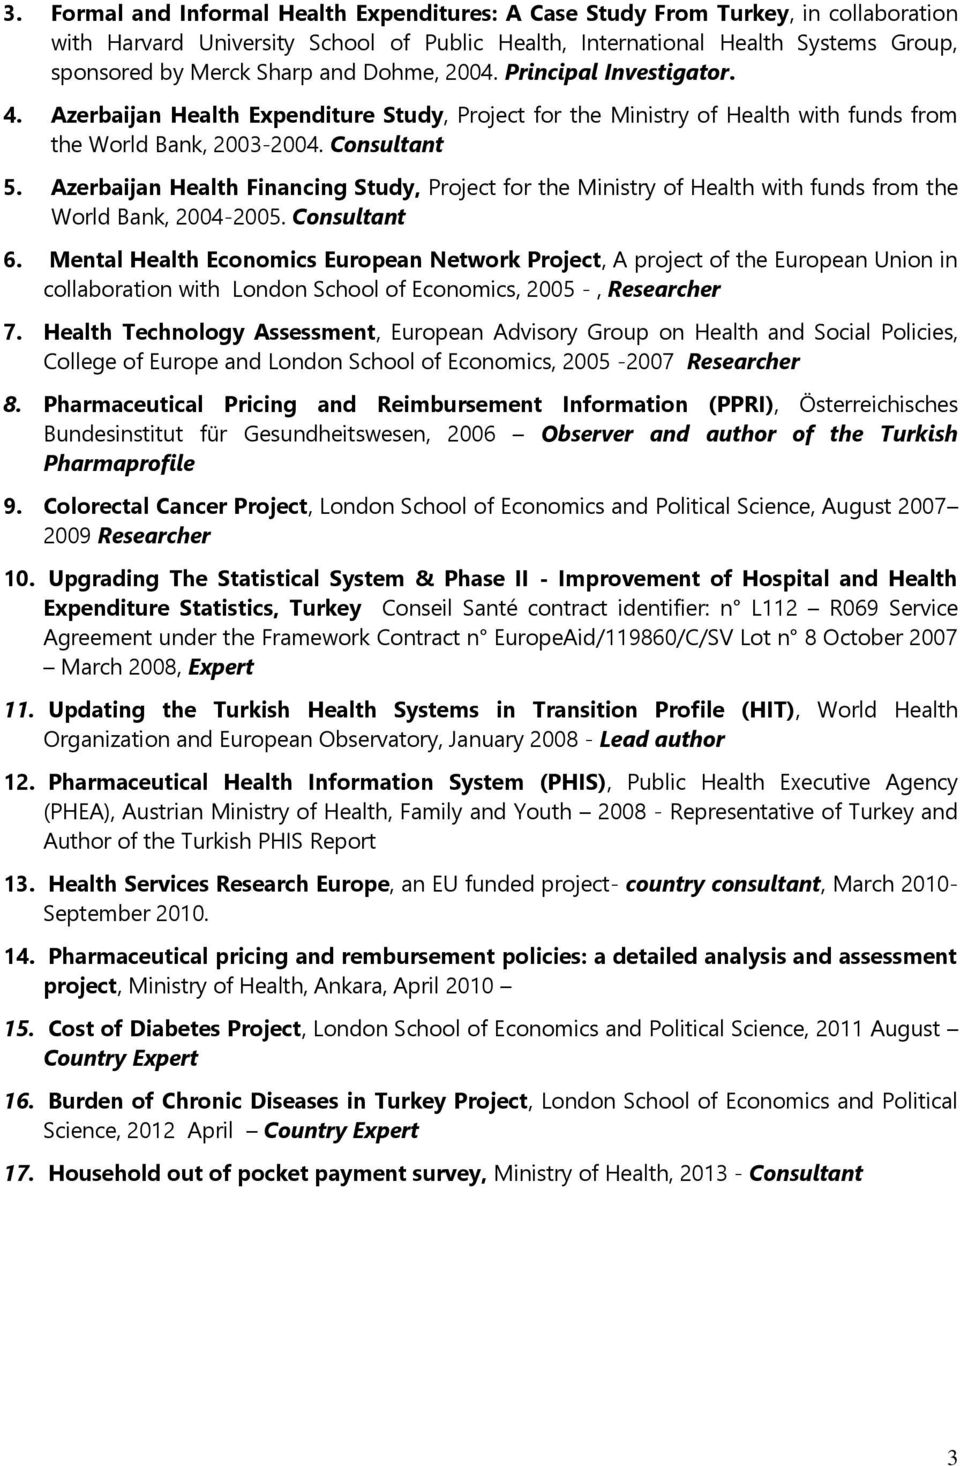 Azerbaijan Health Financing Study, Project for the Ministry of Health with funds from the World Bank, 2004-2005. Consultant 6.